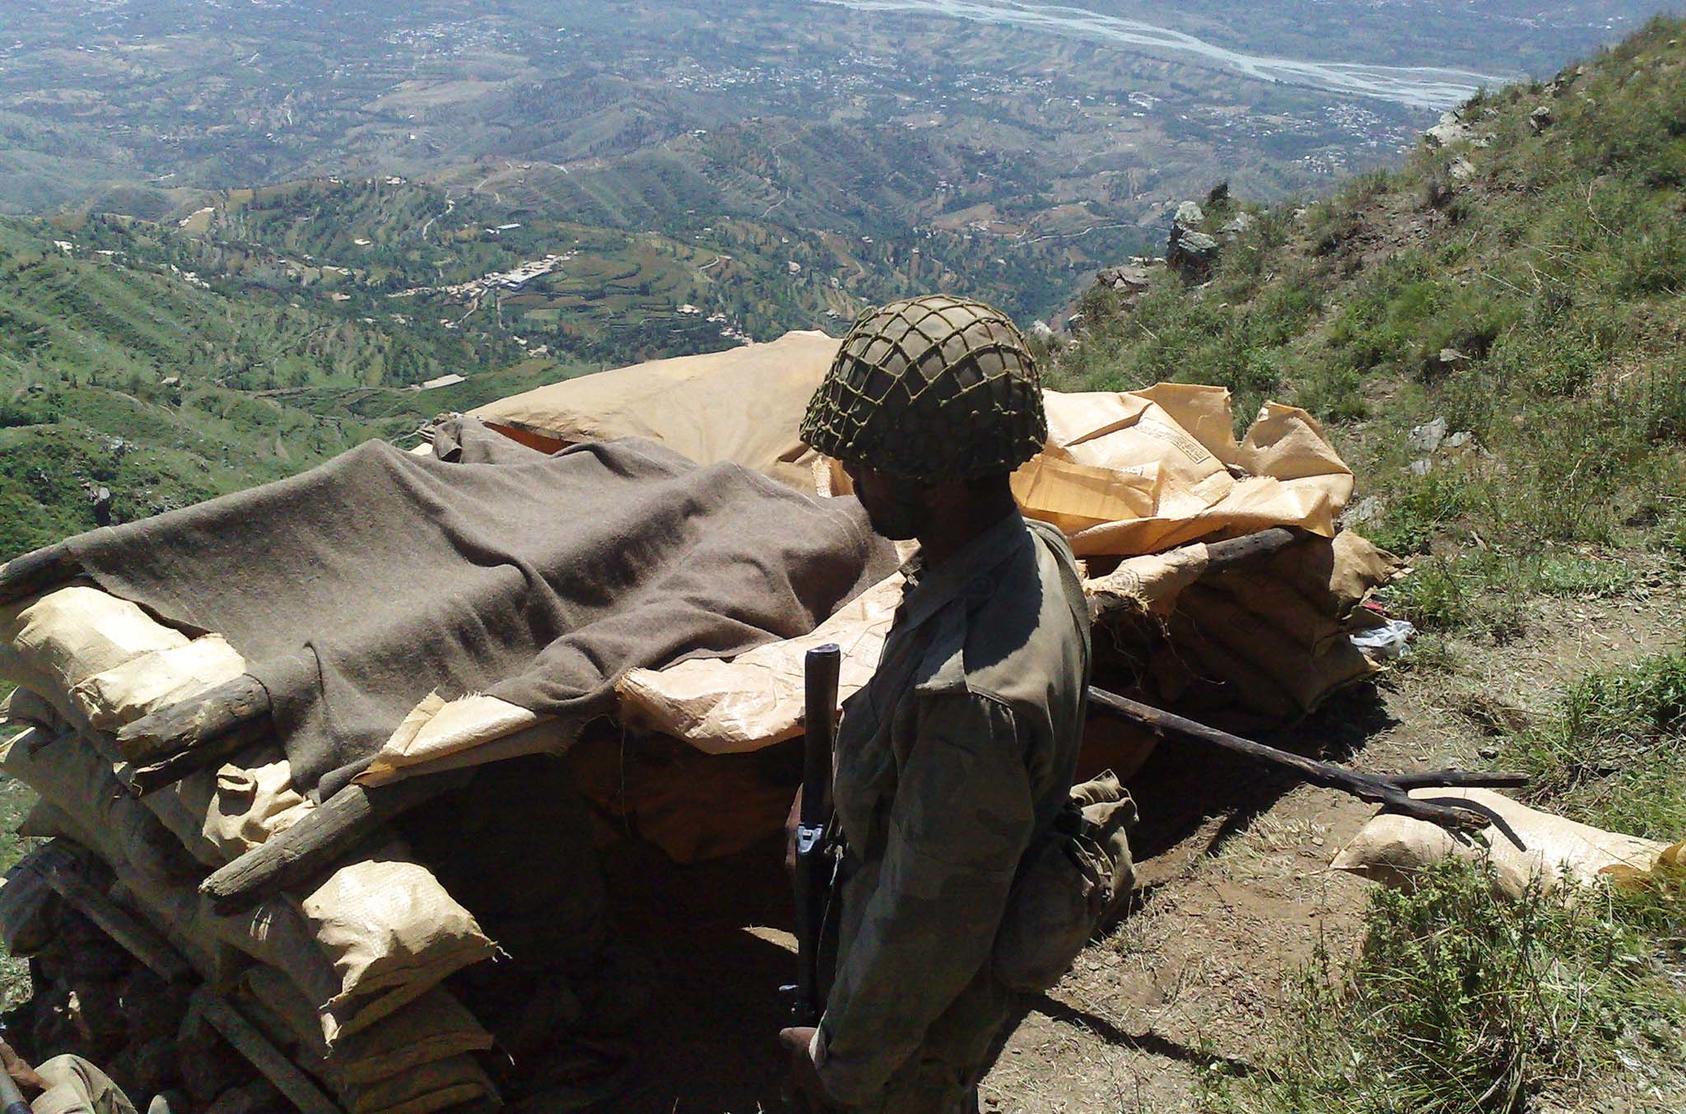 A Pakistani soldier taking part in an operation against Taliban-aligned fighters in Pakistan’s northwest. May 22, 2009. (Al Jazeera English)